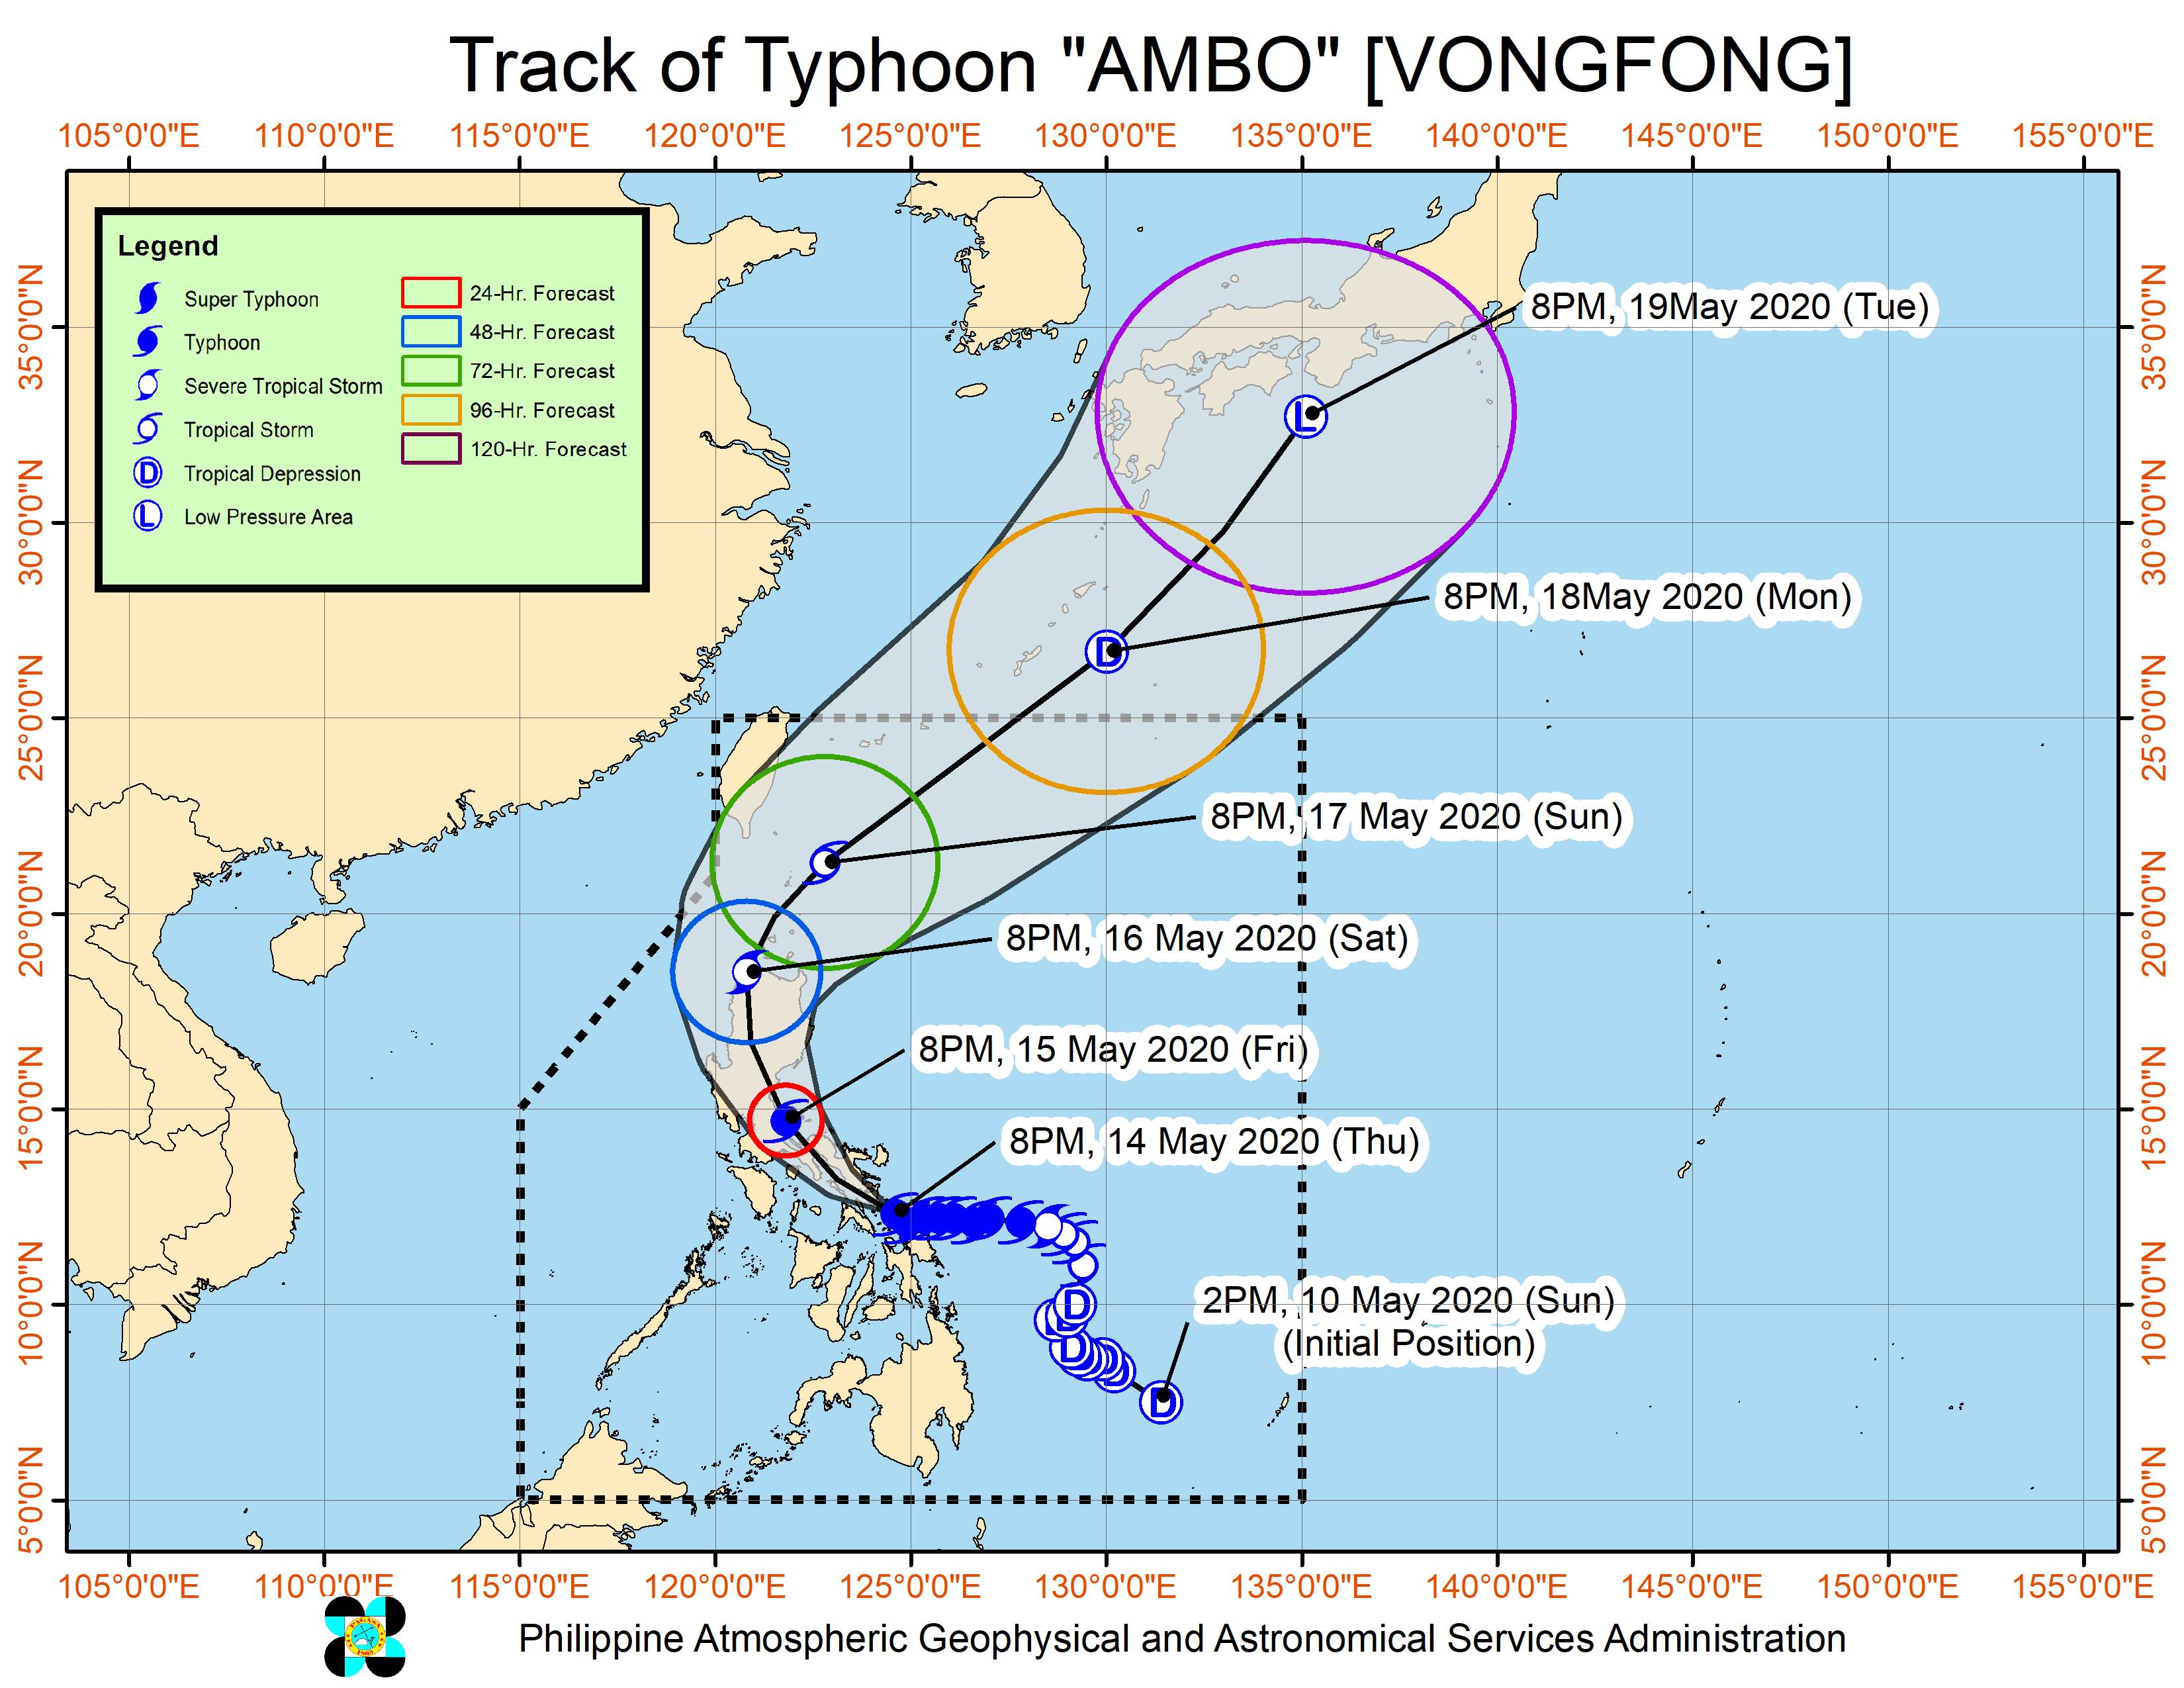 Forecast track of Typhoon Ambo (Vongfong) as of May 14, 2020, 11 pm. Image from PAGASA 